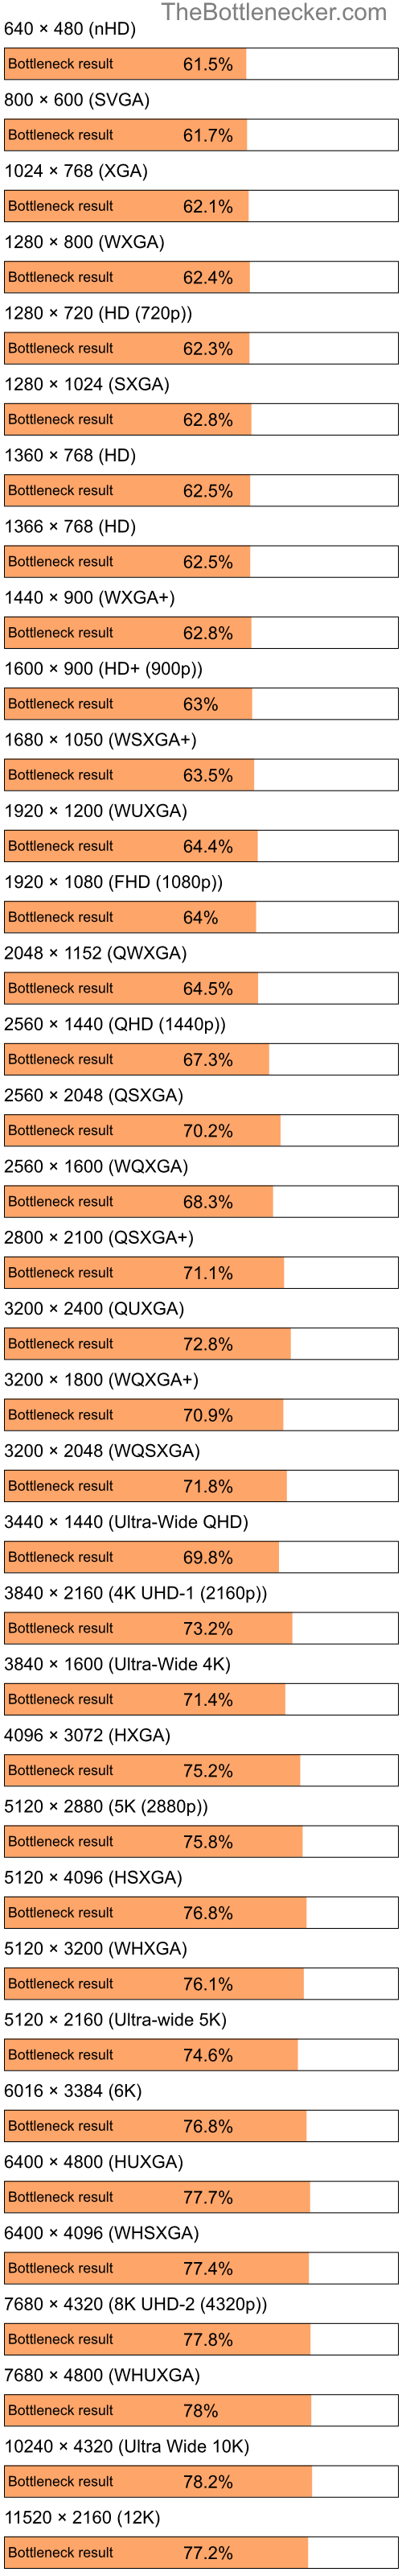 Bottleneck results by resolution for Intel Celeron and NVIDIA GeForce 6800 in7 Days to Die